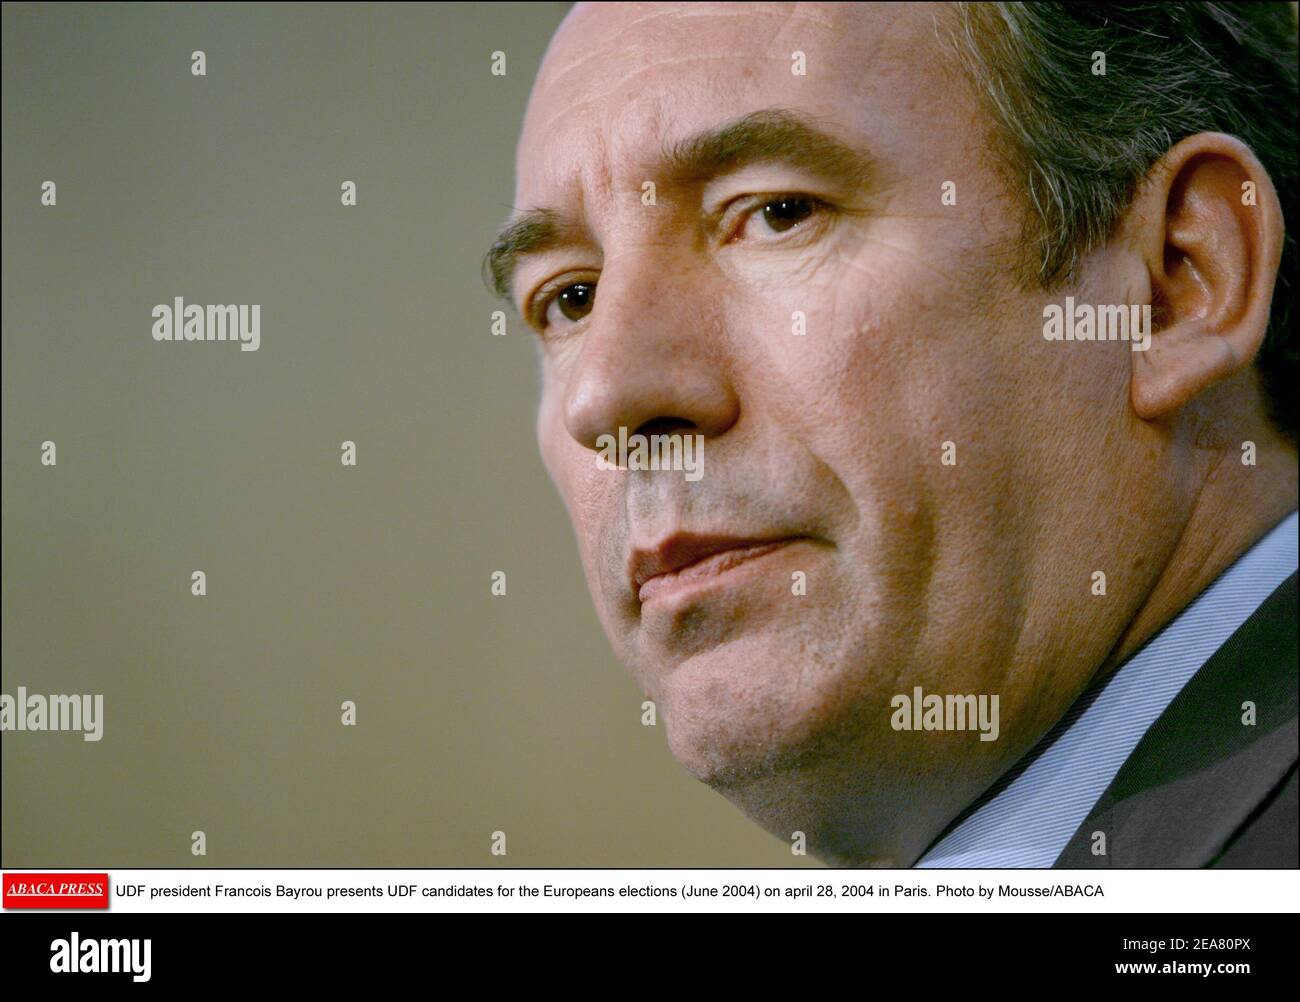 UDF president Francois Bayrou presents UDF candidates for the Europeans elections (June 2004) on april 28, 2004 in Paris. Photo by Mousse/ABACA Stock Photo